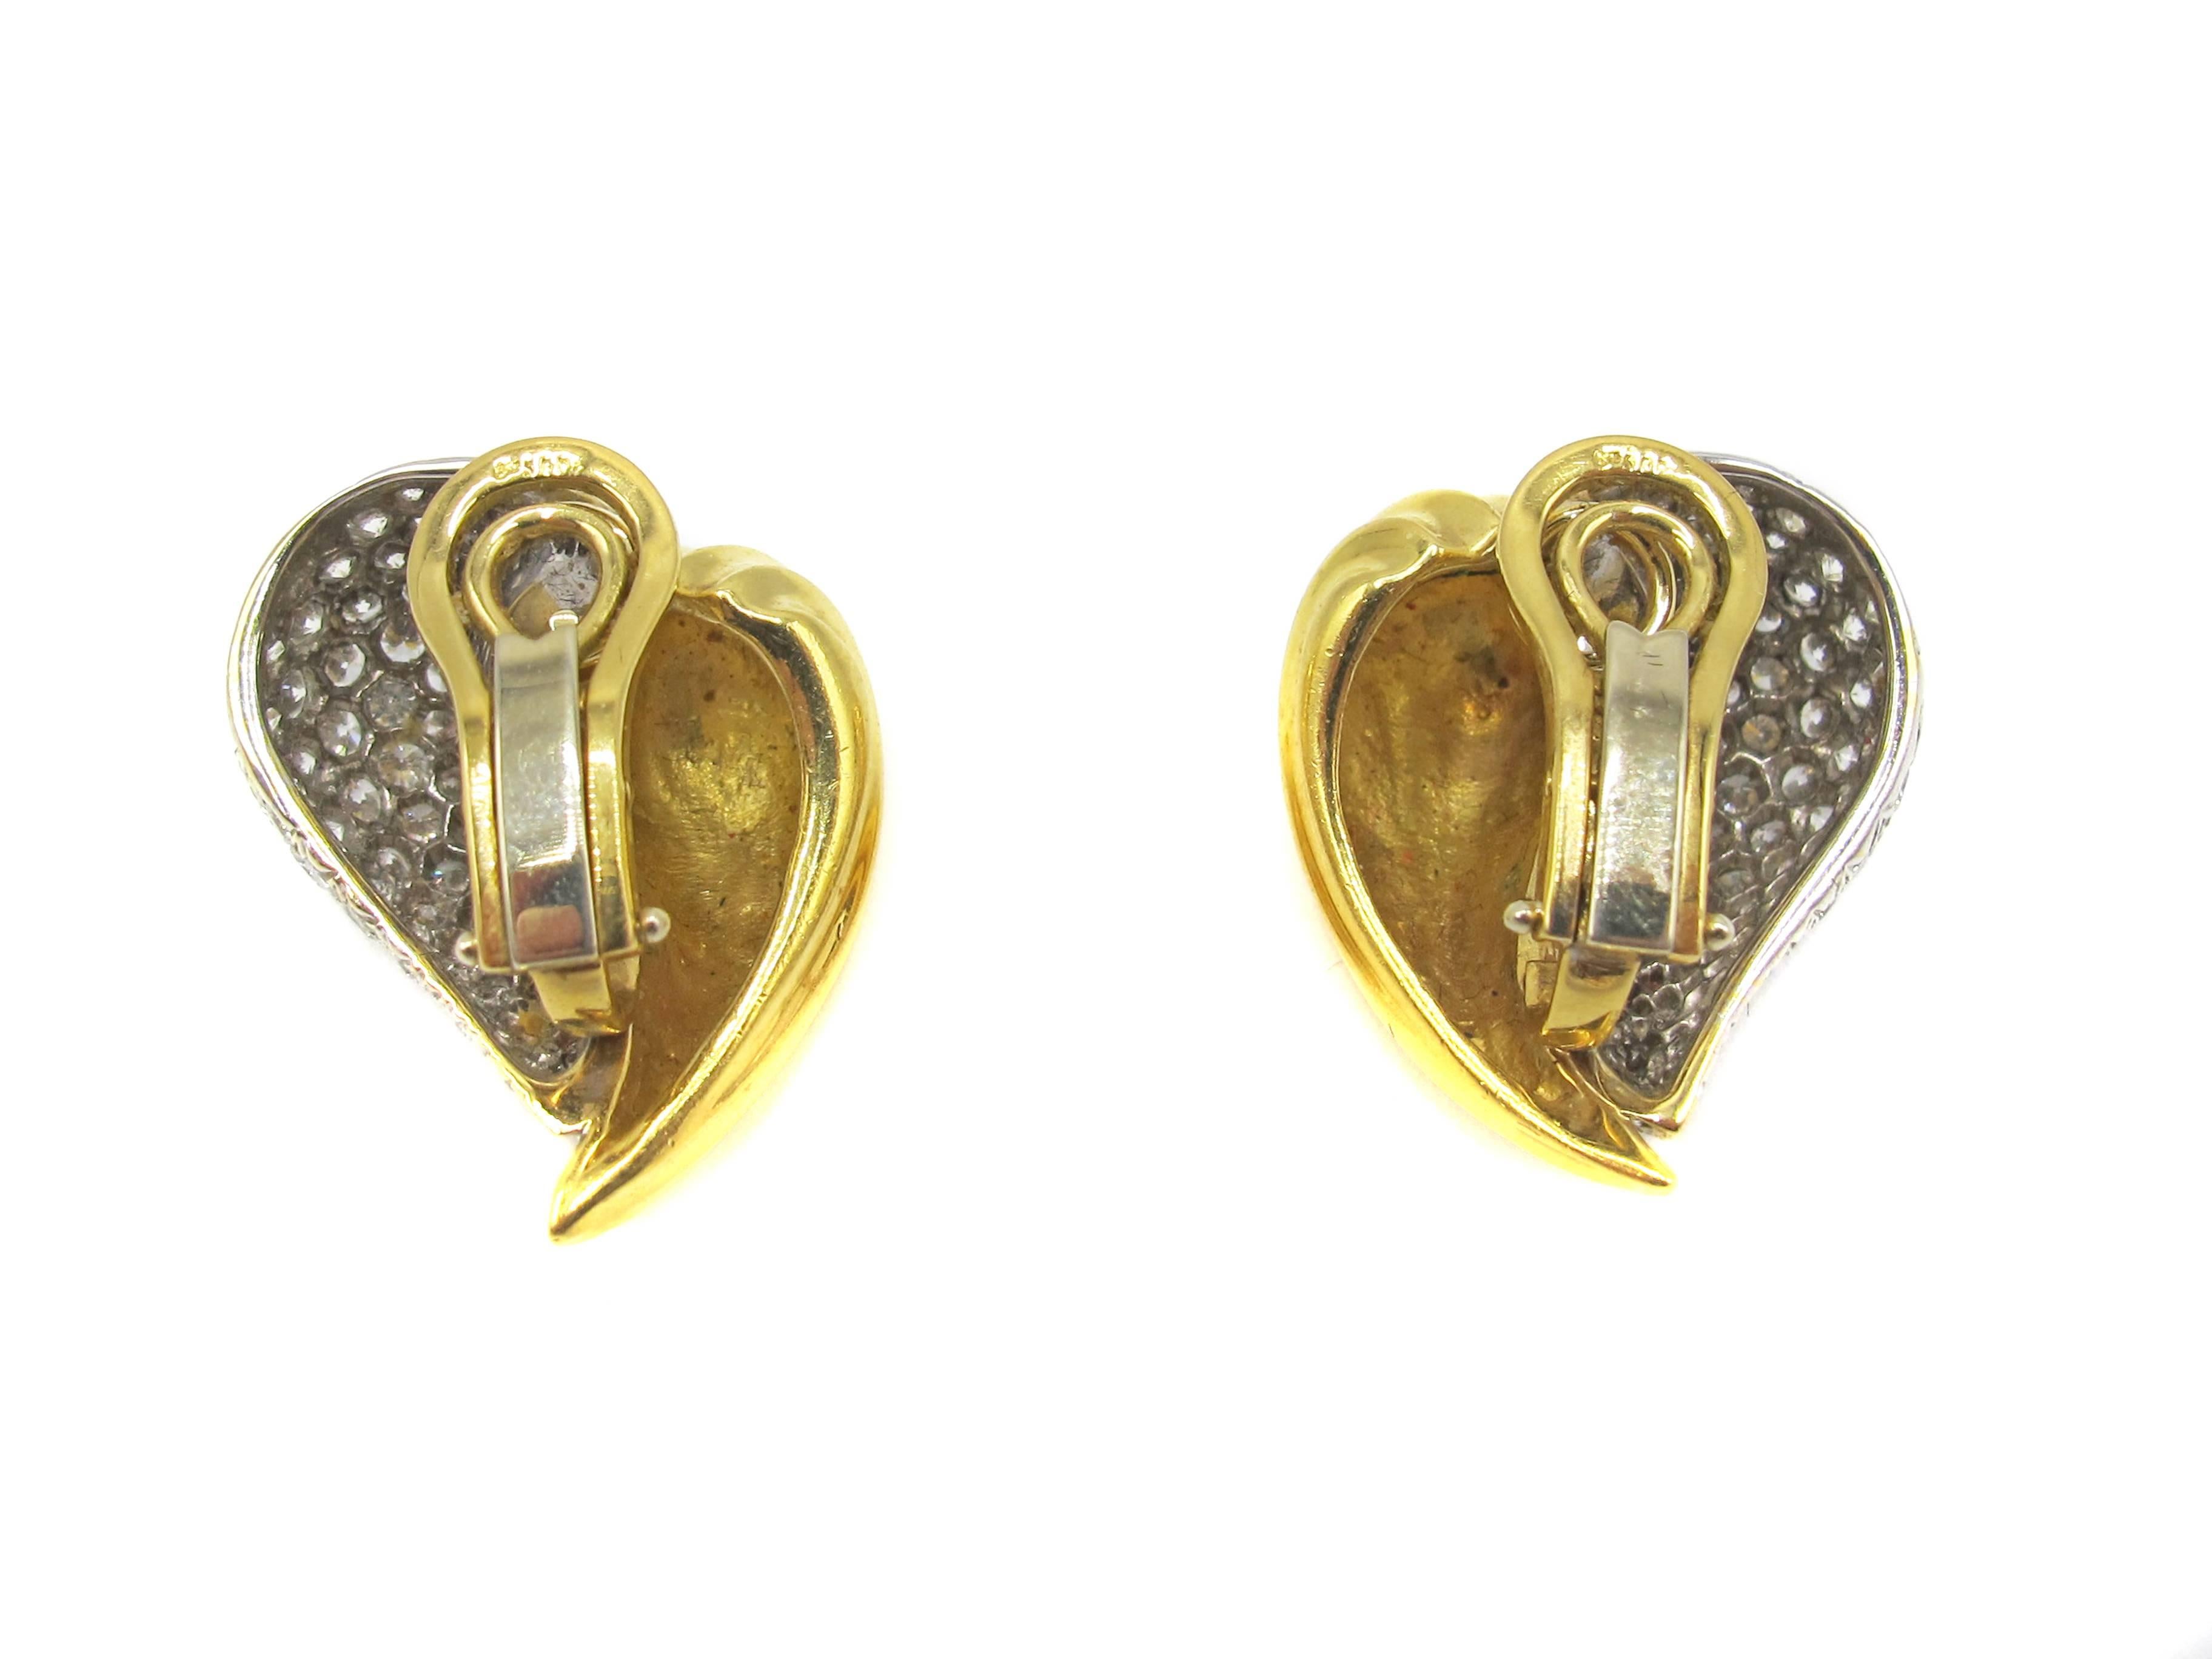 Chic 18 karat white and yellow gold ear clips designed in the shape of a pair of intertwining leaves. The amazing craftsmanship and design of these hand crafted ear clips bring this three dimensional creation to life on the ear. One section of